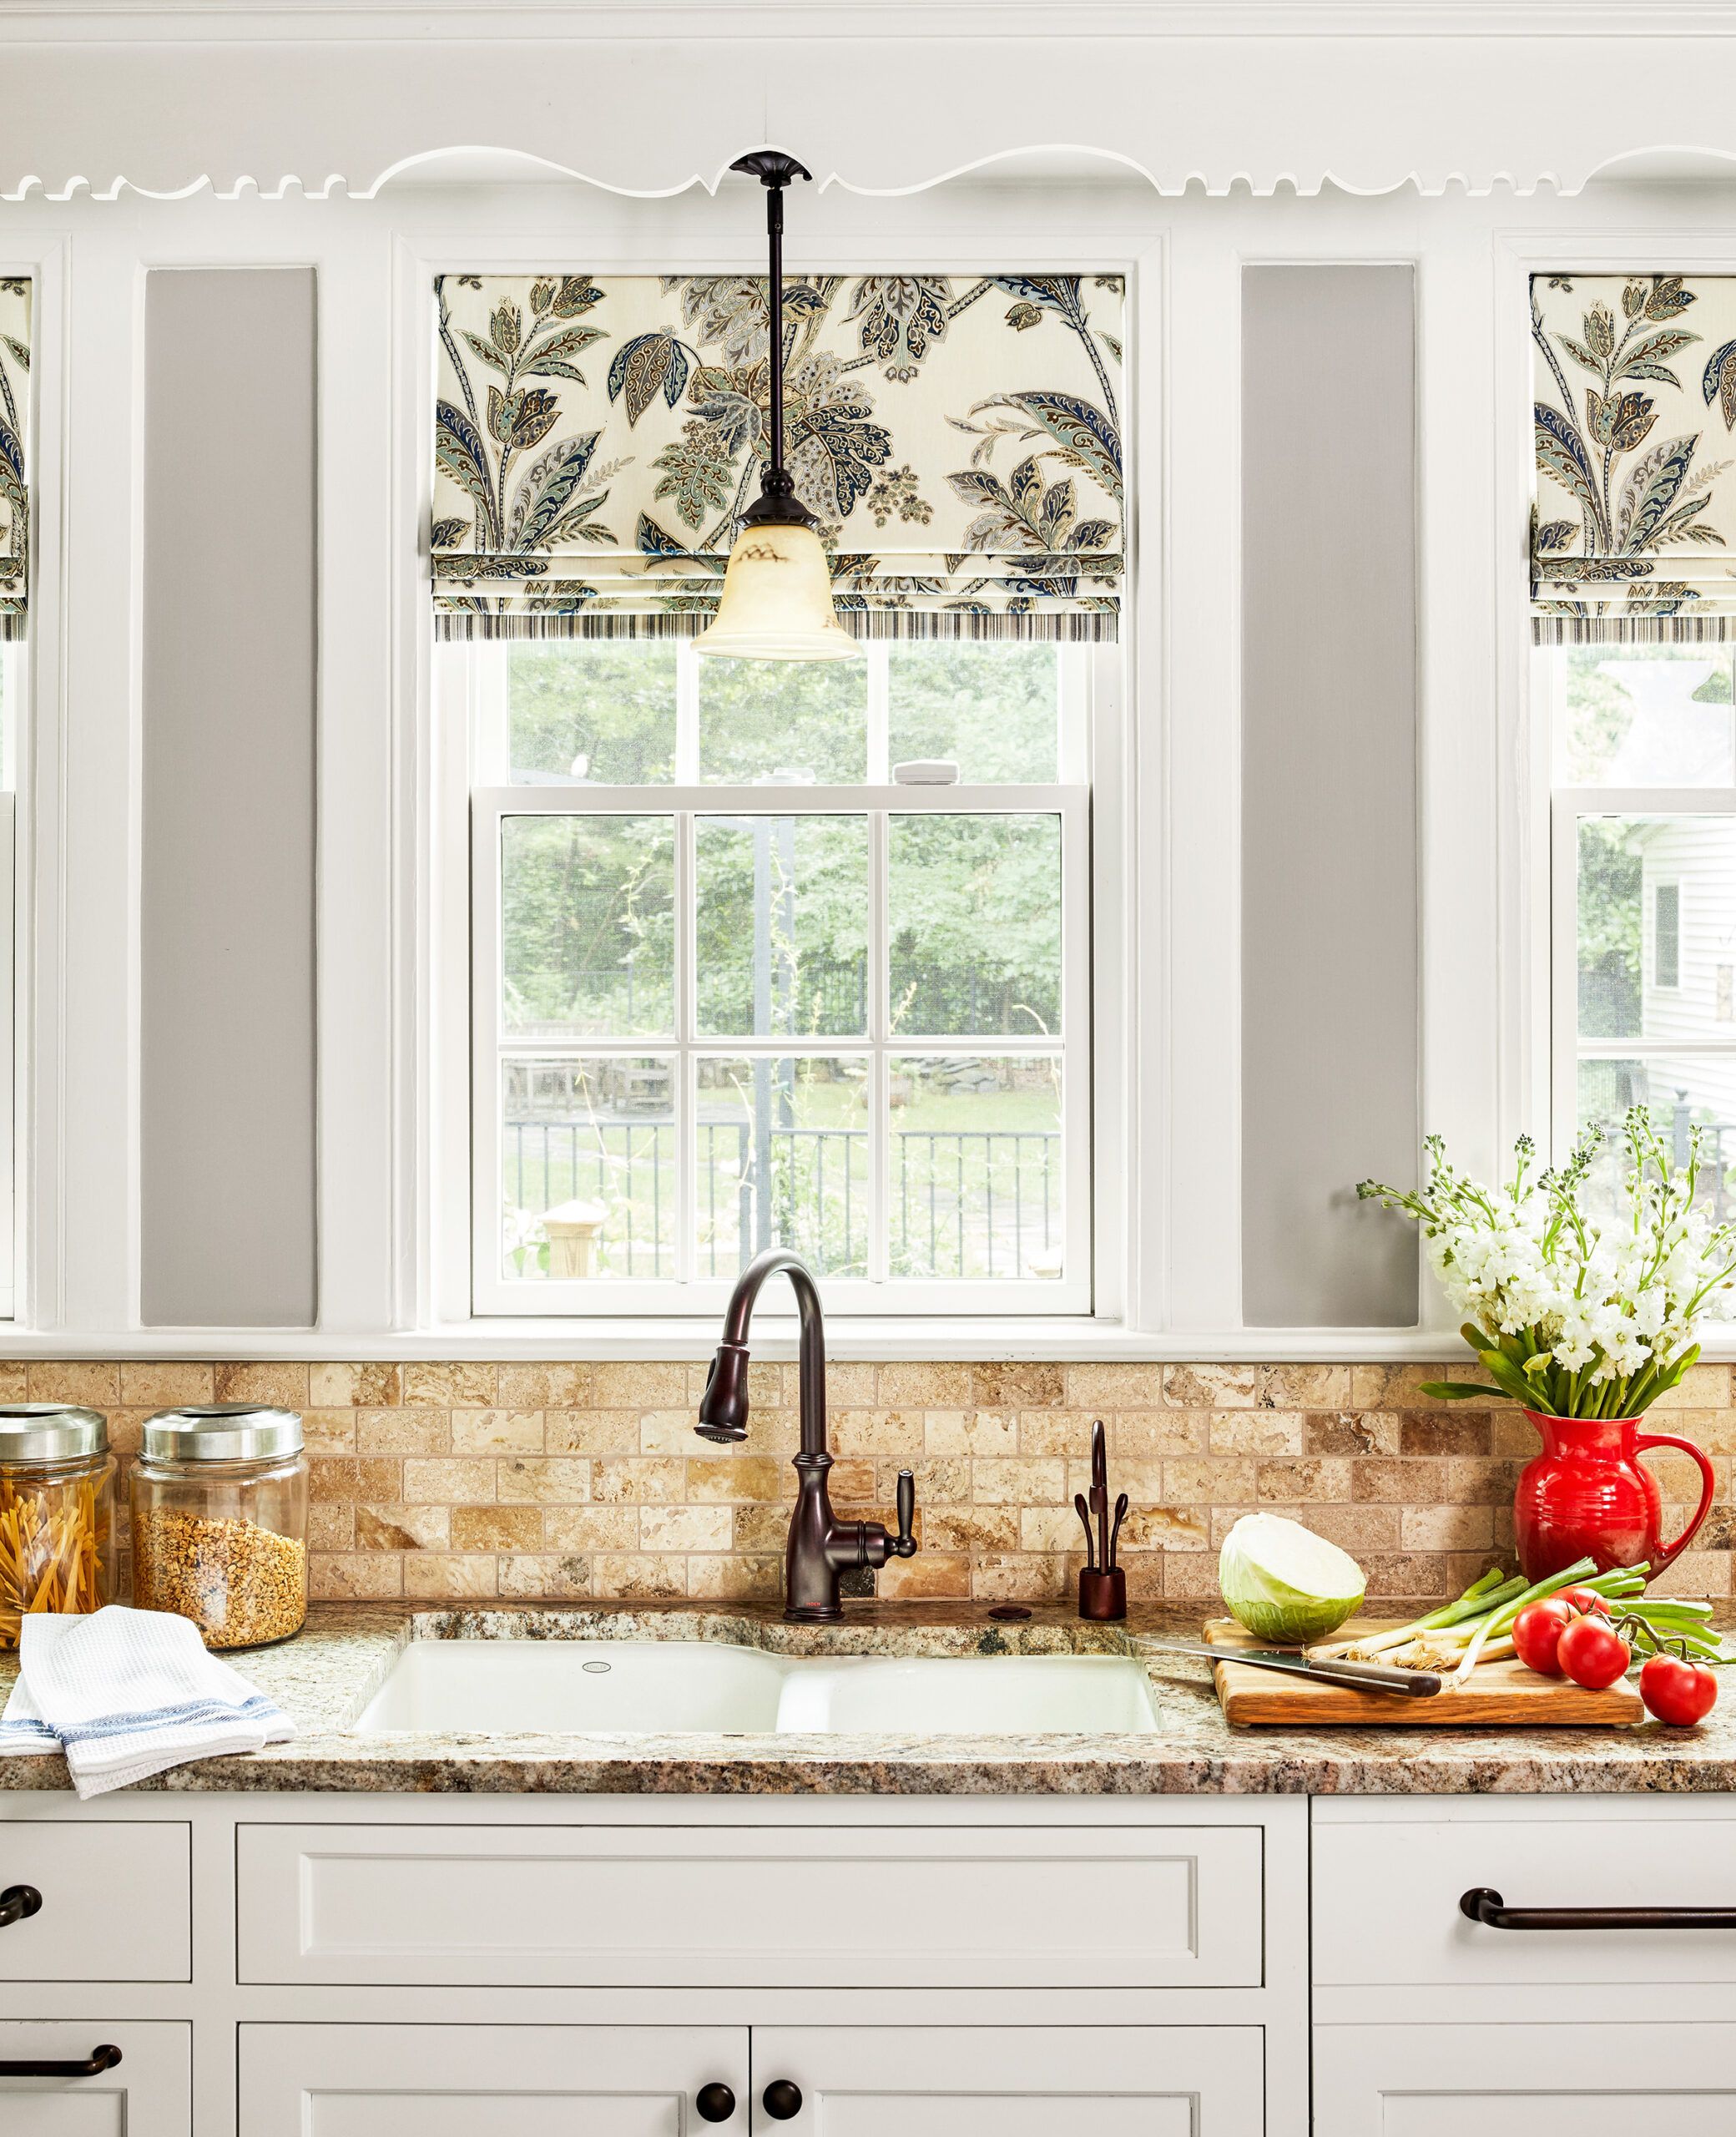 What are the Best Backsplash Materials for Your Kitchen? - This